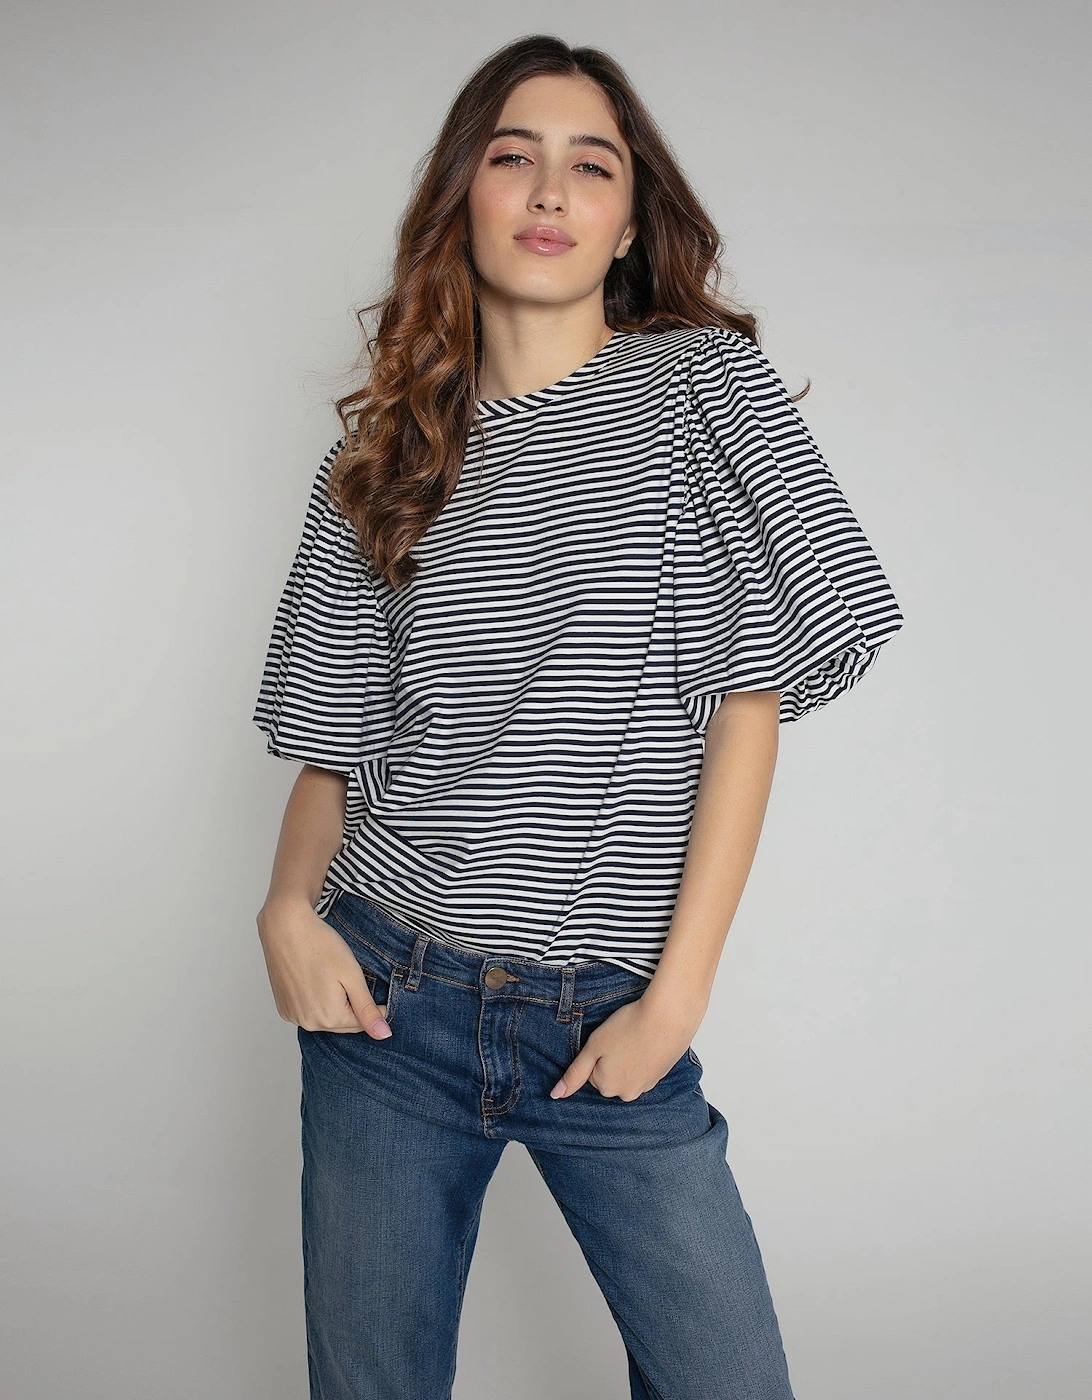 Rhea Top in Navy and White Stripe